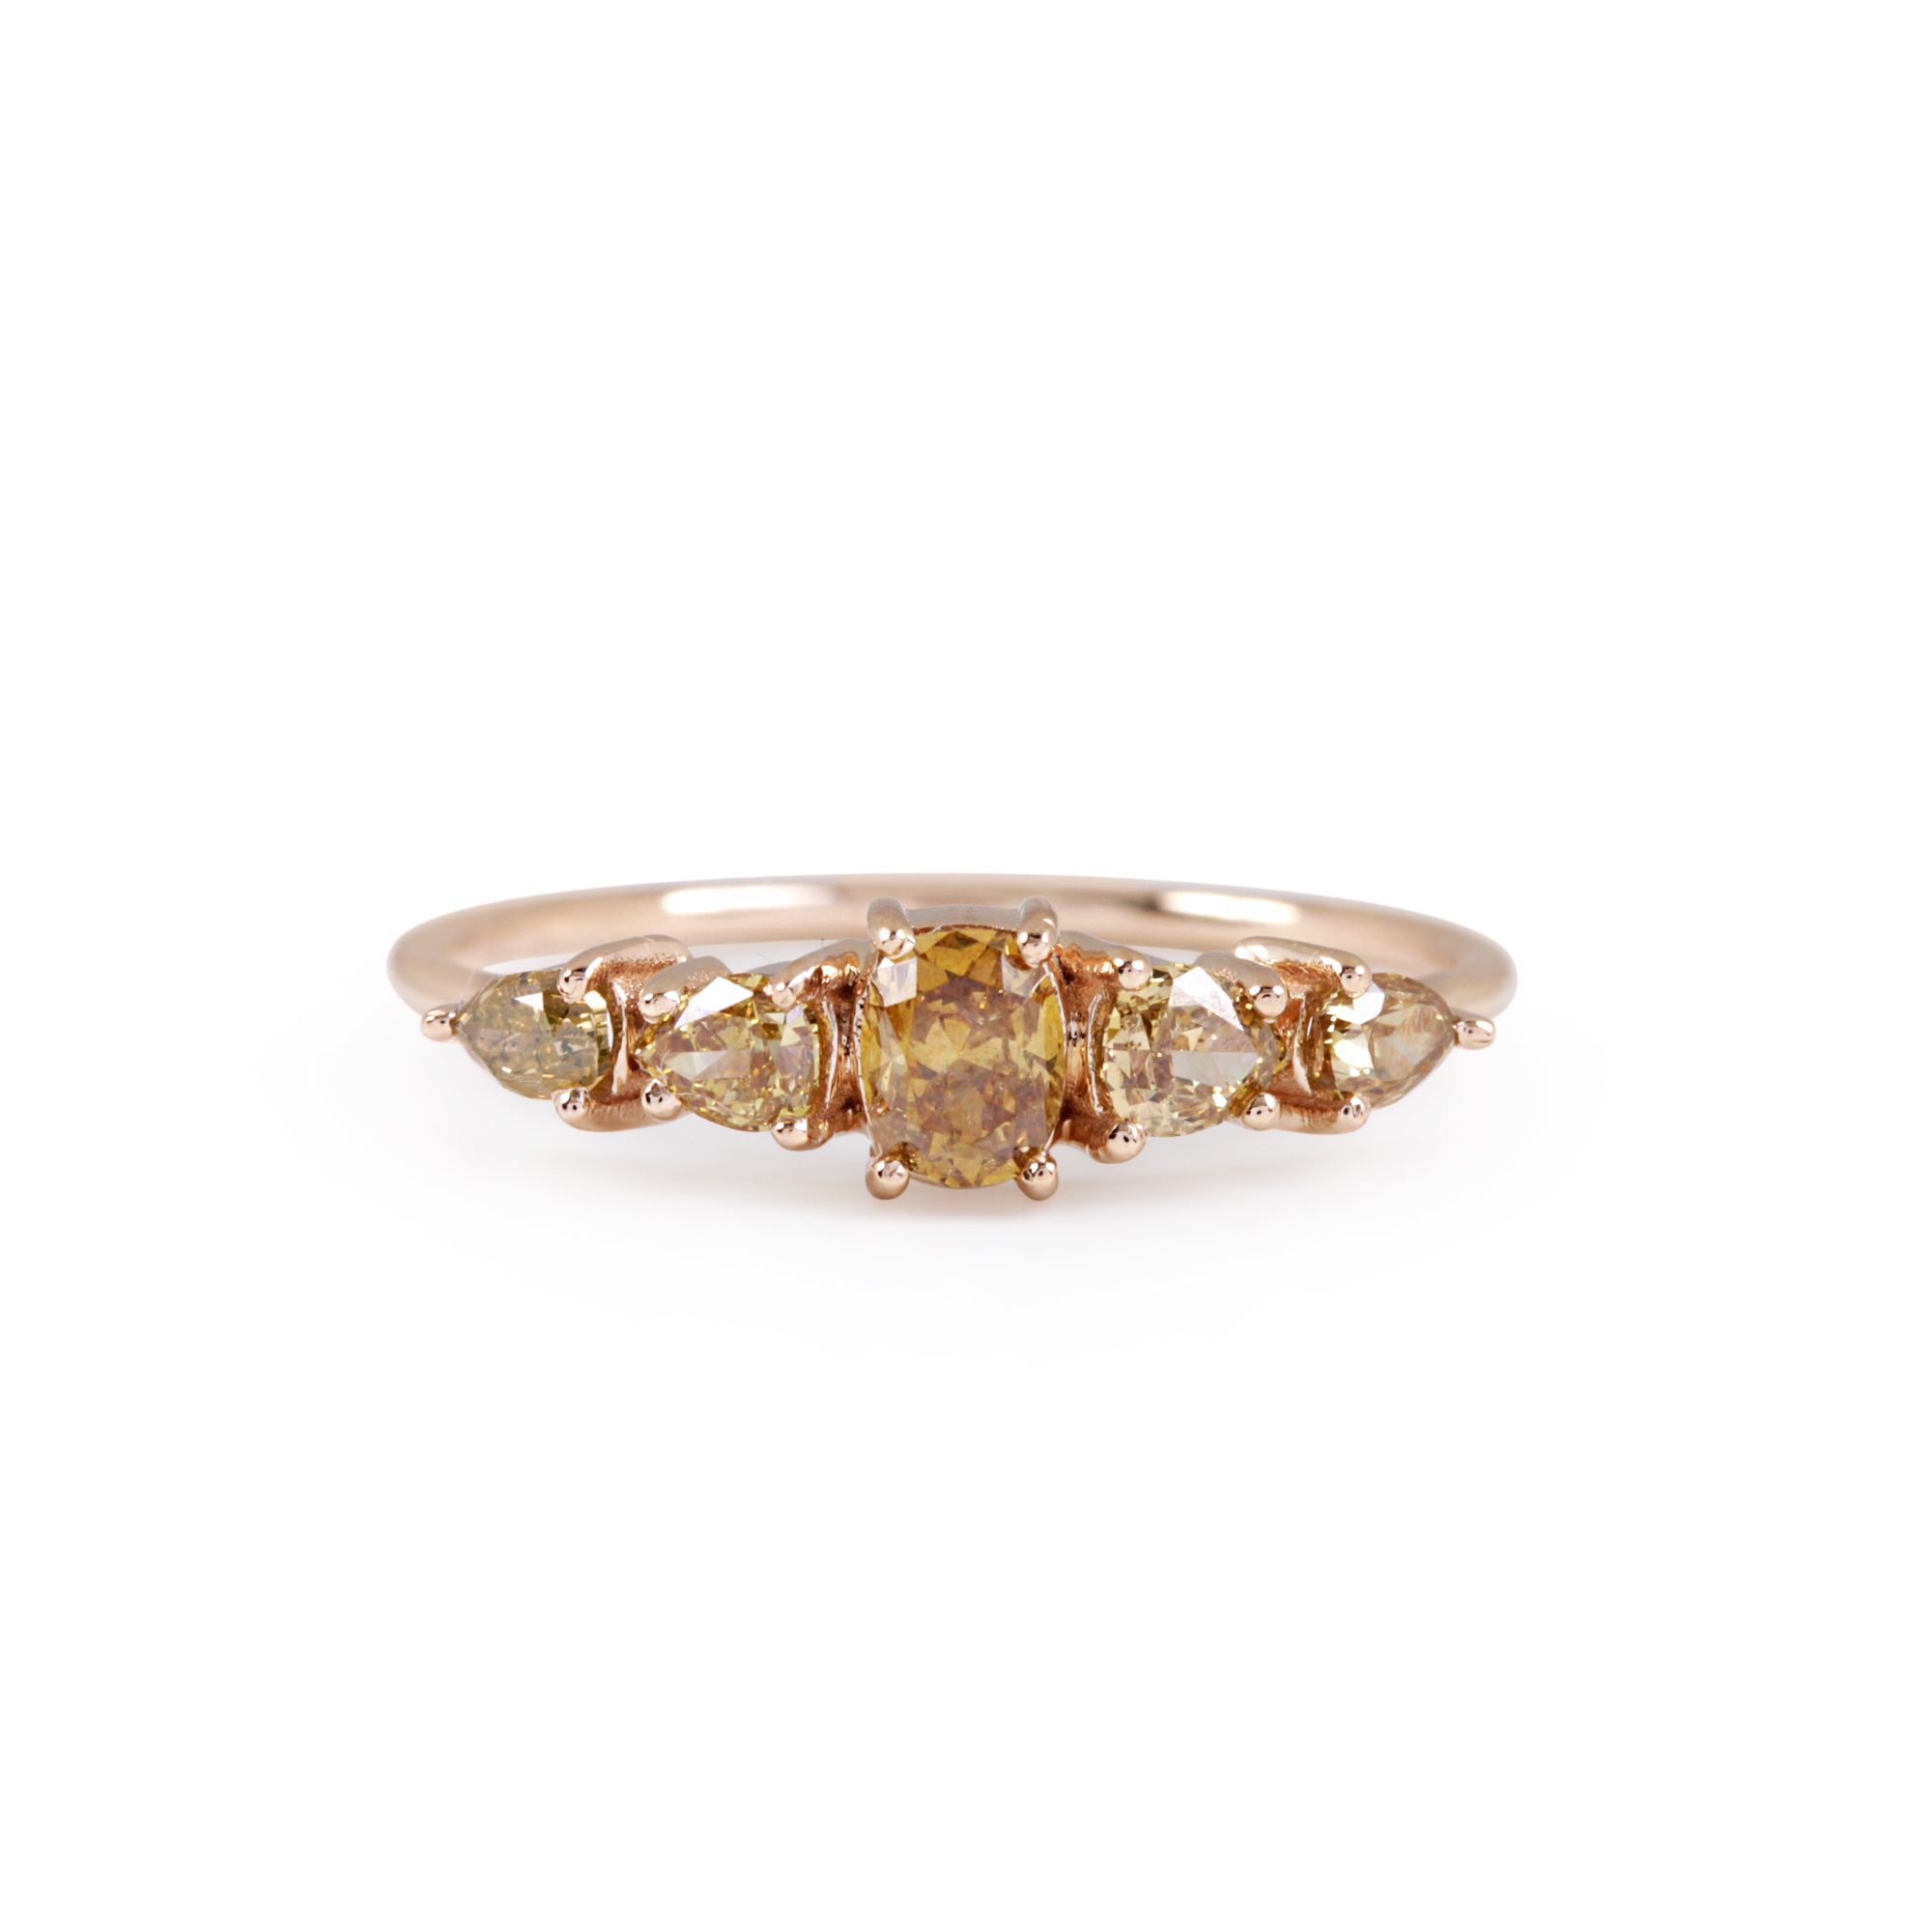 Natural Pave Diamond Ring 14K Solid Yellow Gold Jewelry